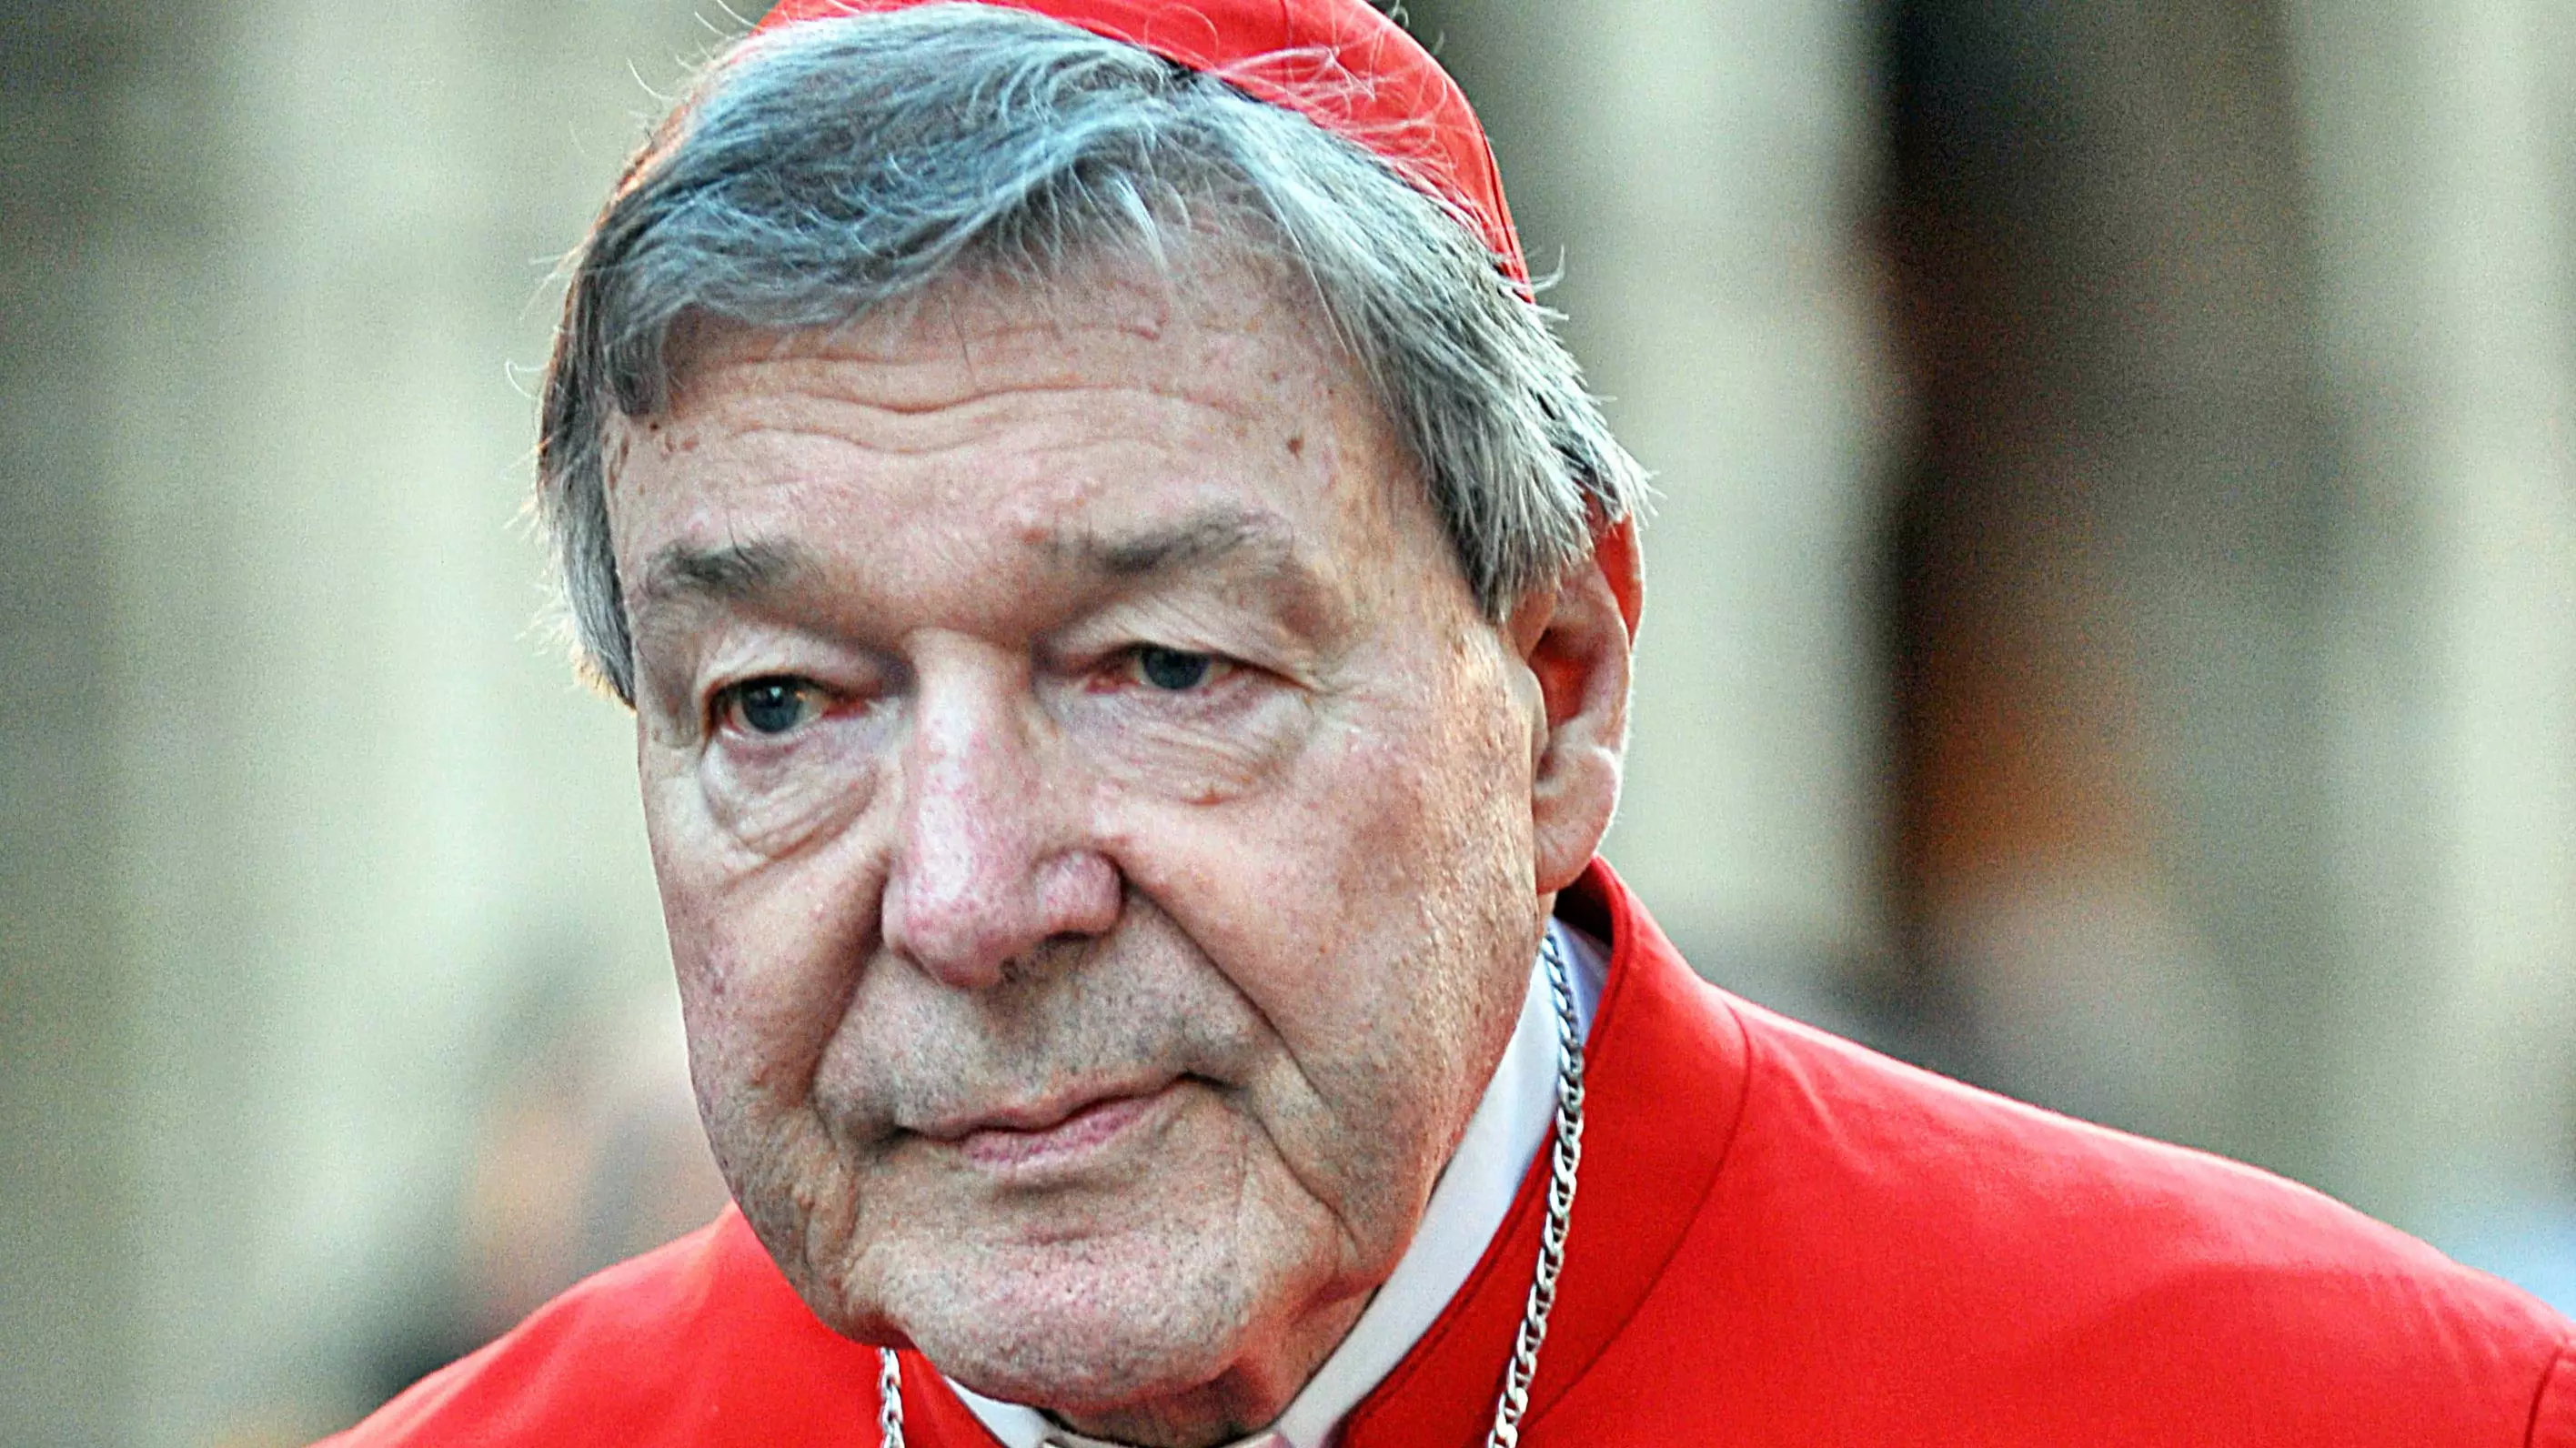 Police Investigating Claims $1 Million In Vatican Funds Was Sent To Influence George Pell Trial